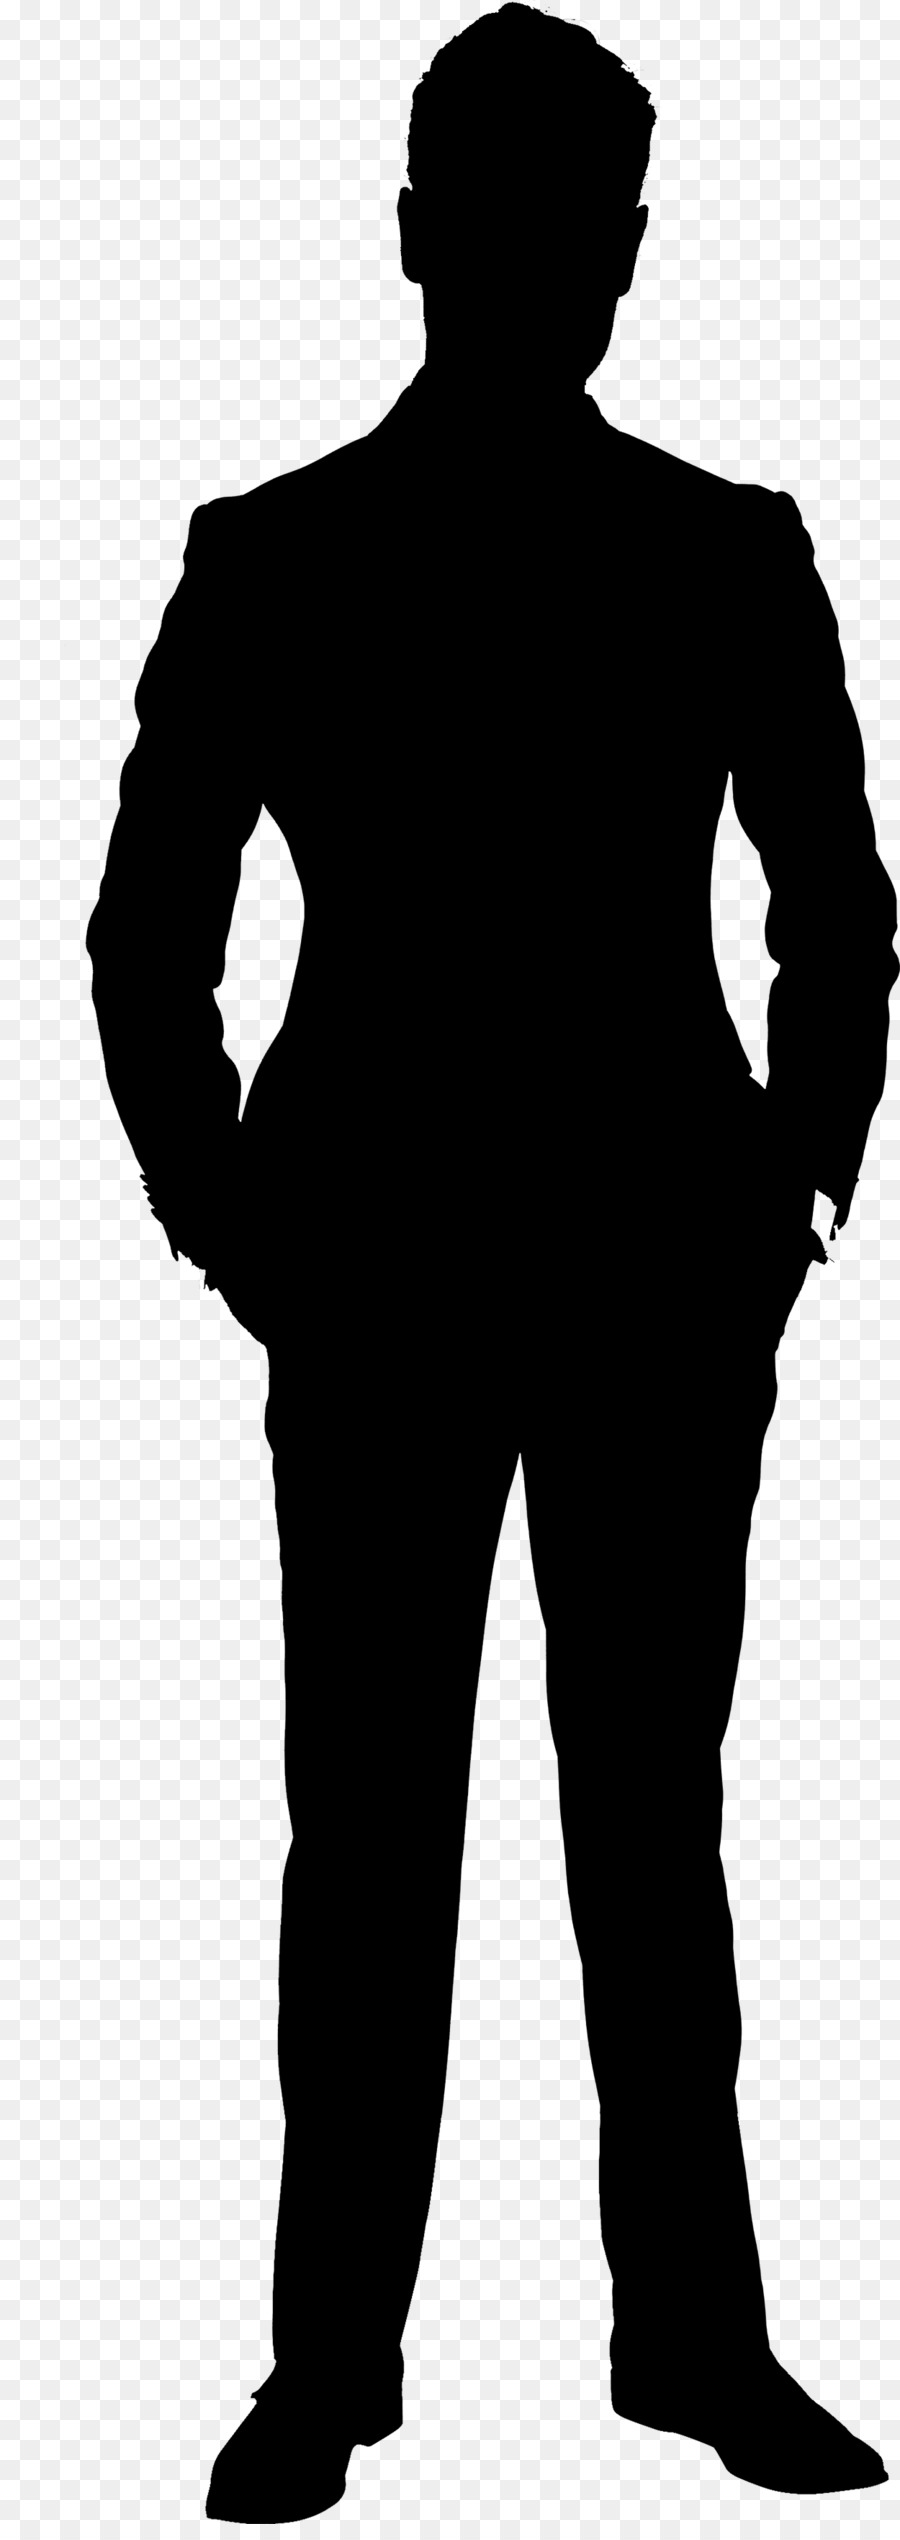 Silhouette Clip art - Male Silhouette PNG Clip Art png download - 3019*8000 - Free Transparent Silhouette png Download.